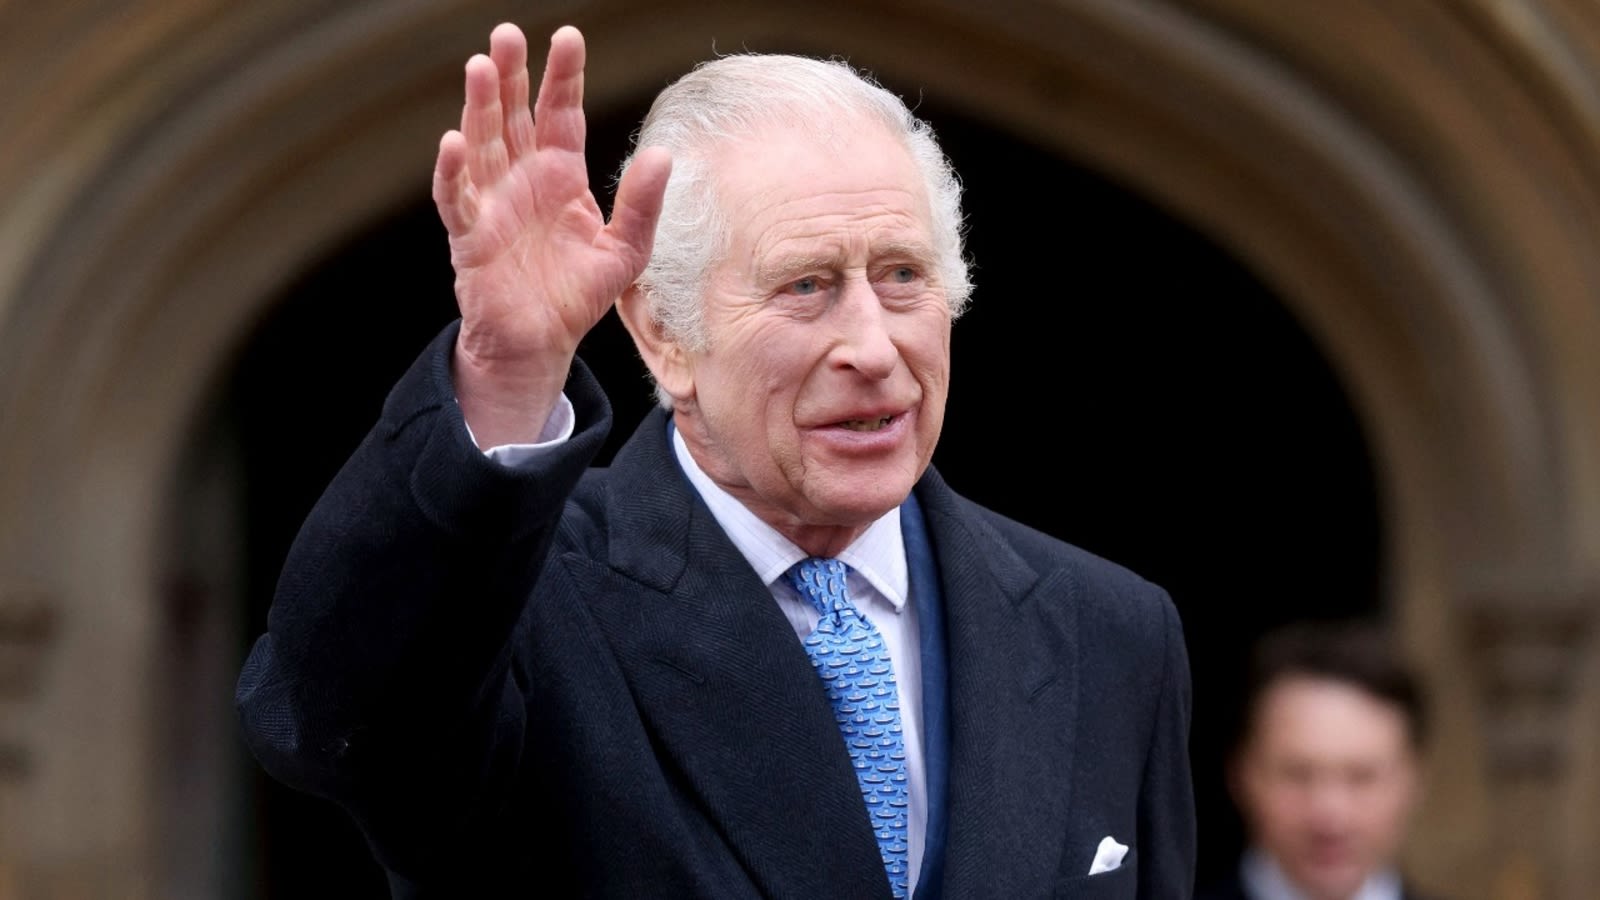 King Charles III will resume public duties next week after cancer treatment, palace says